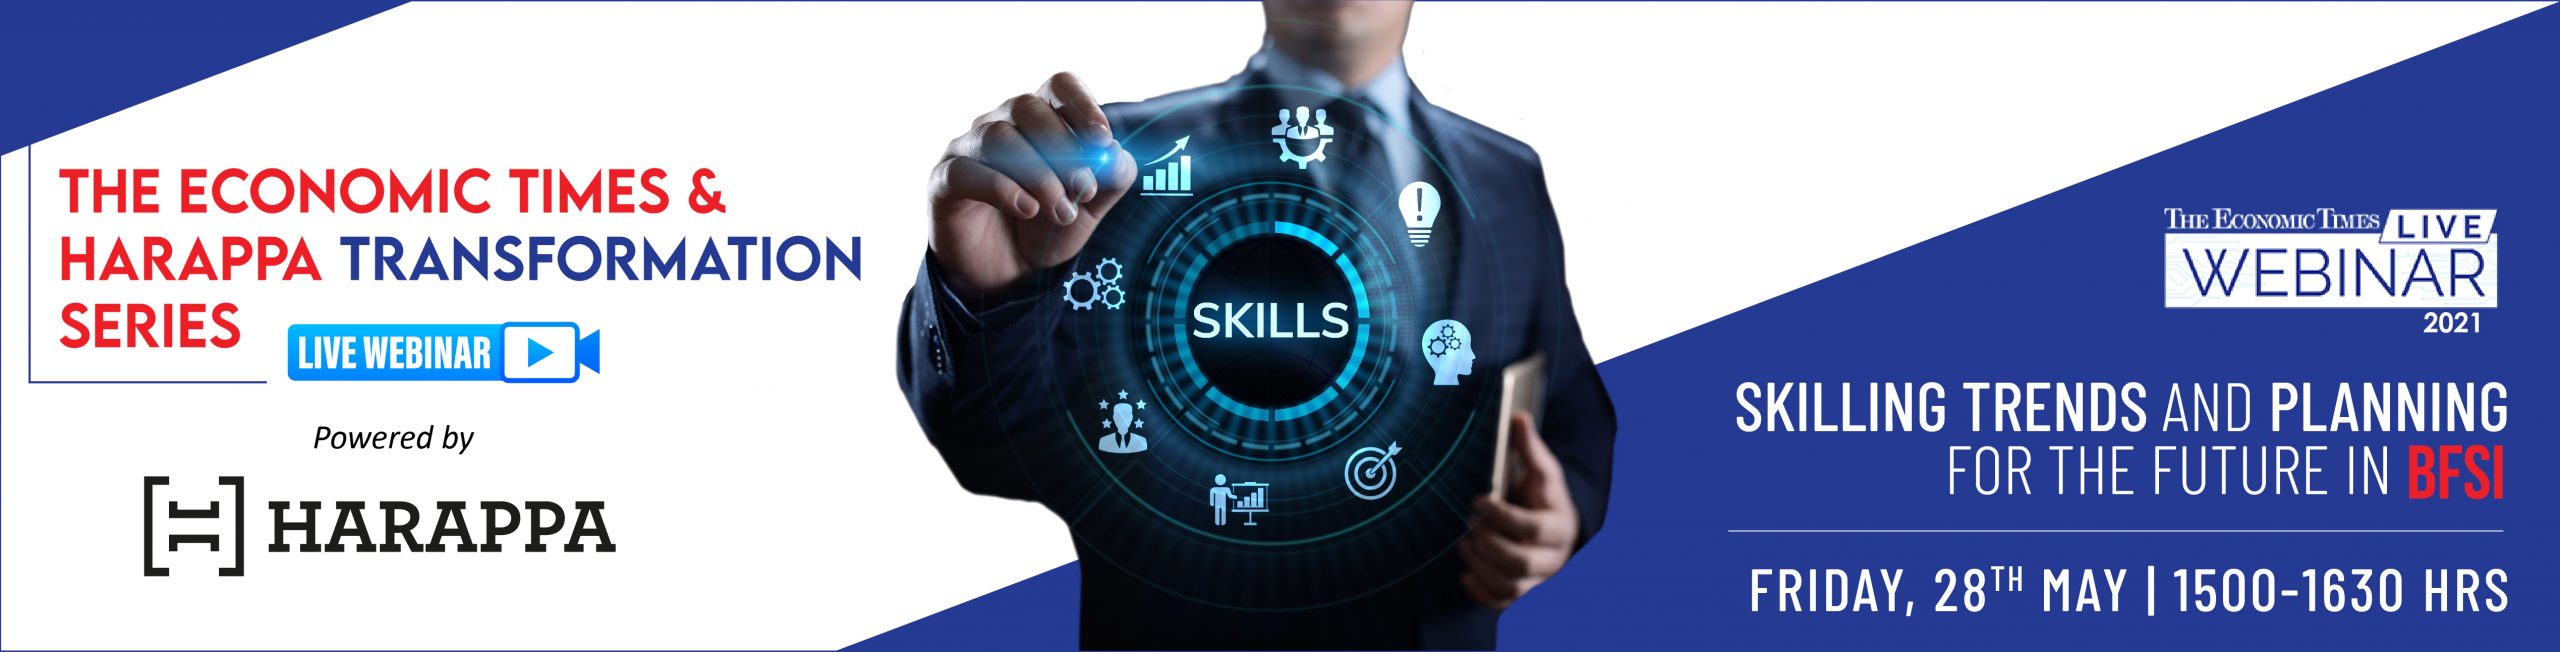 4 talent trends BFSI employers need to build workforce resilience